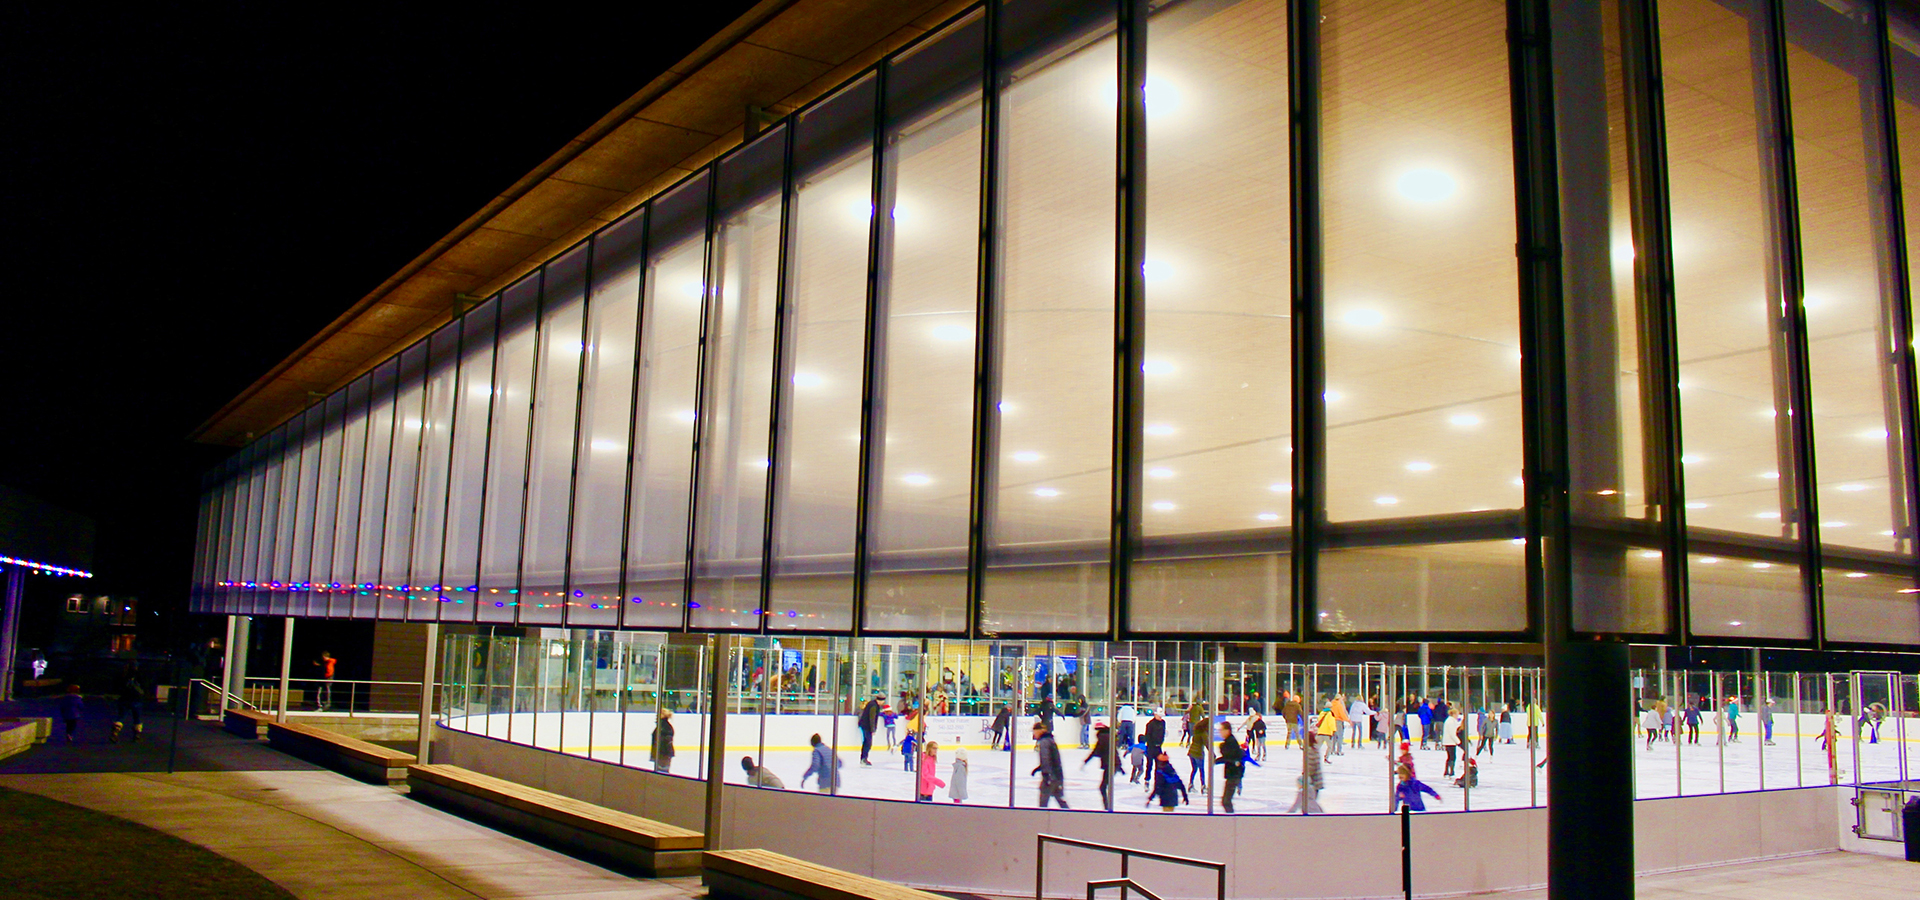 Outside view of the pavilion during a holiday skate.